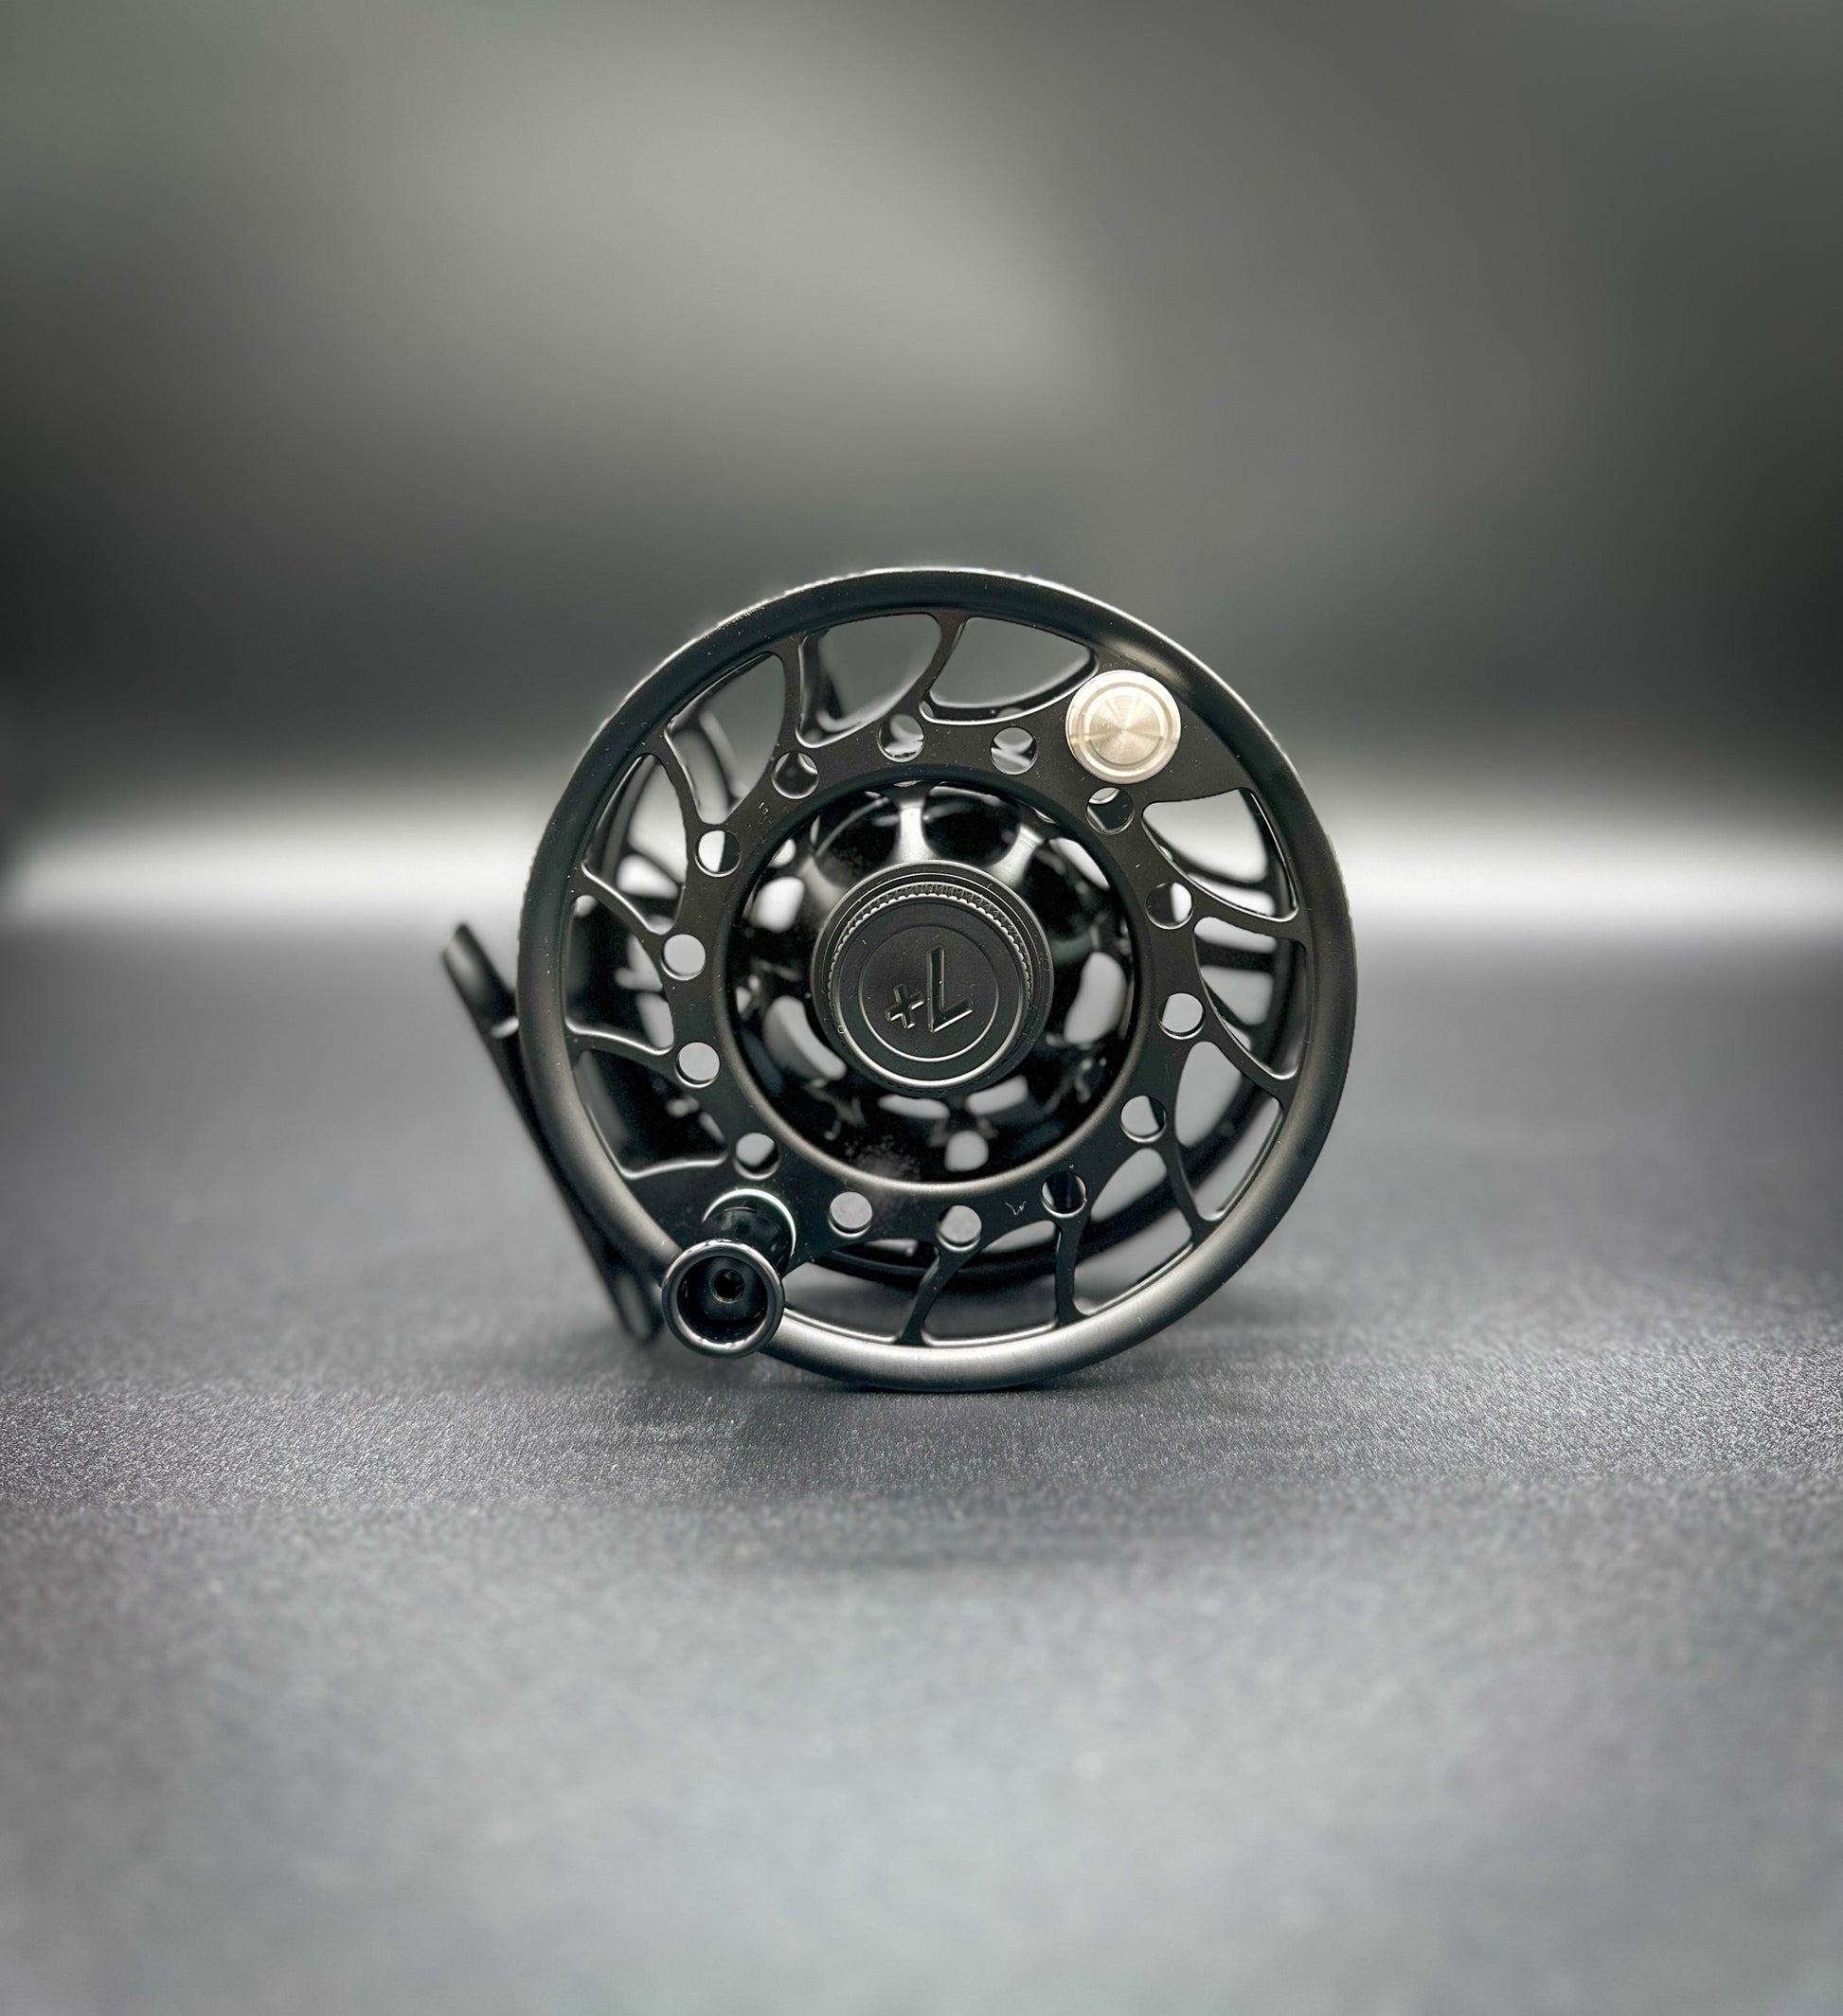 Hatch Nevermore Iconic Limited Edition Fly Reel 9 Plus